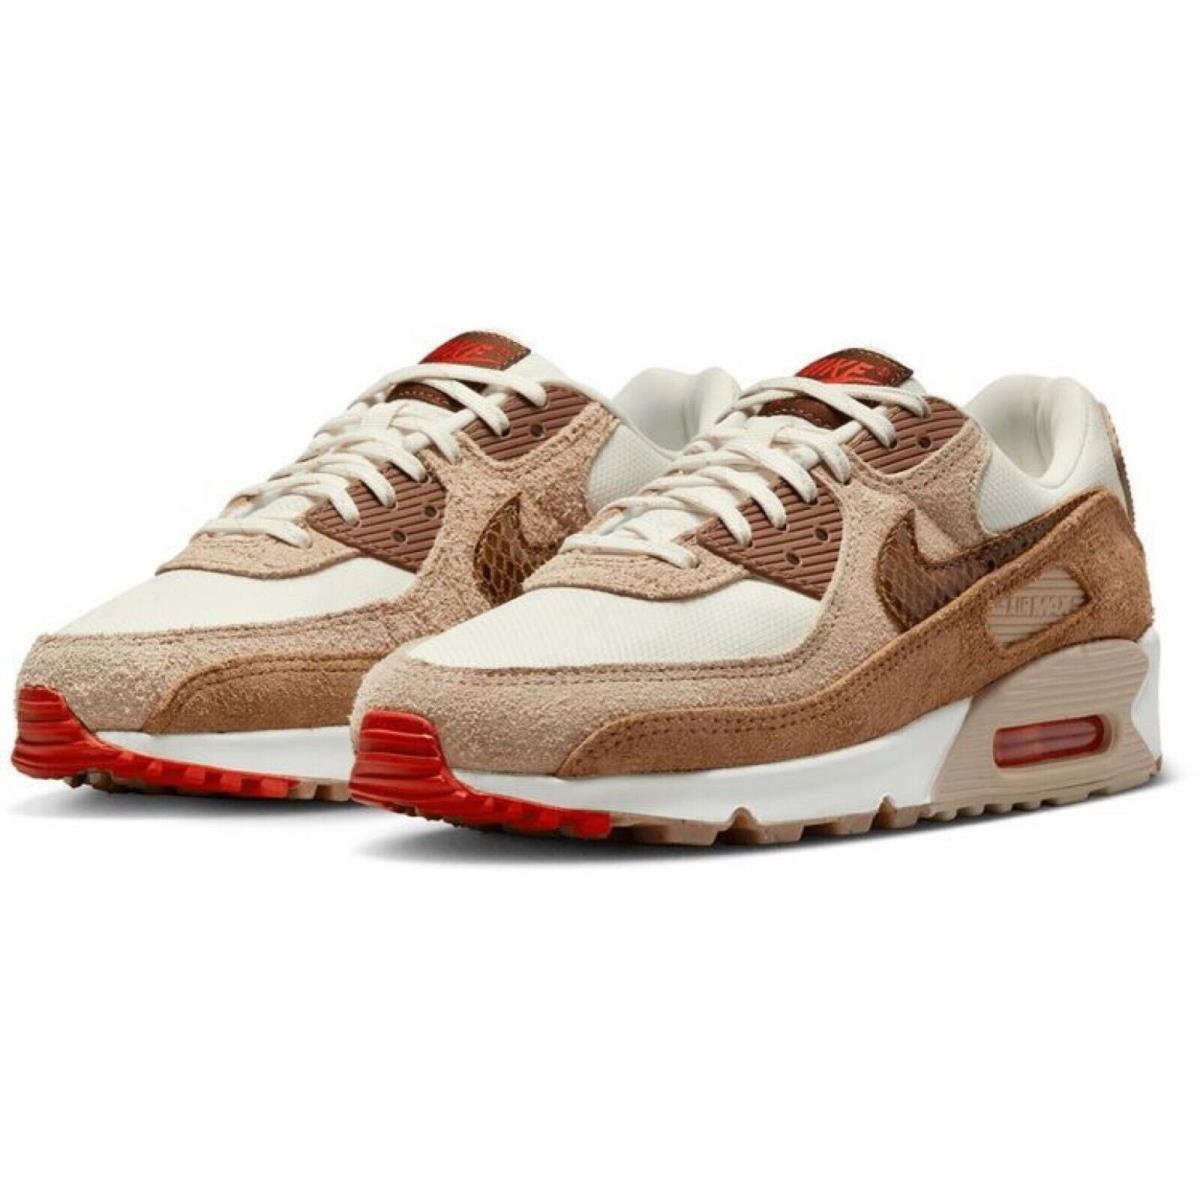 Nike shoes Air Max - Brown , White/red Manufacturer 9